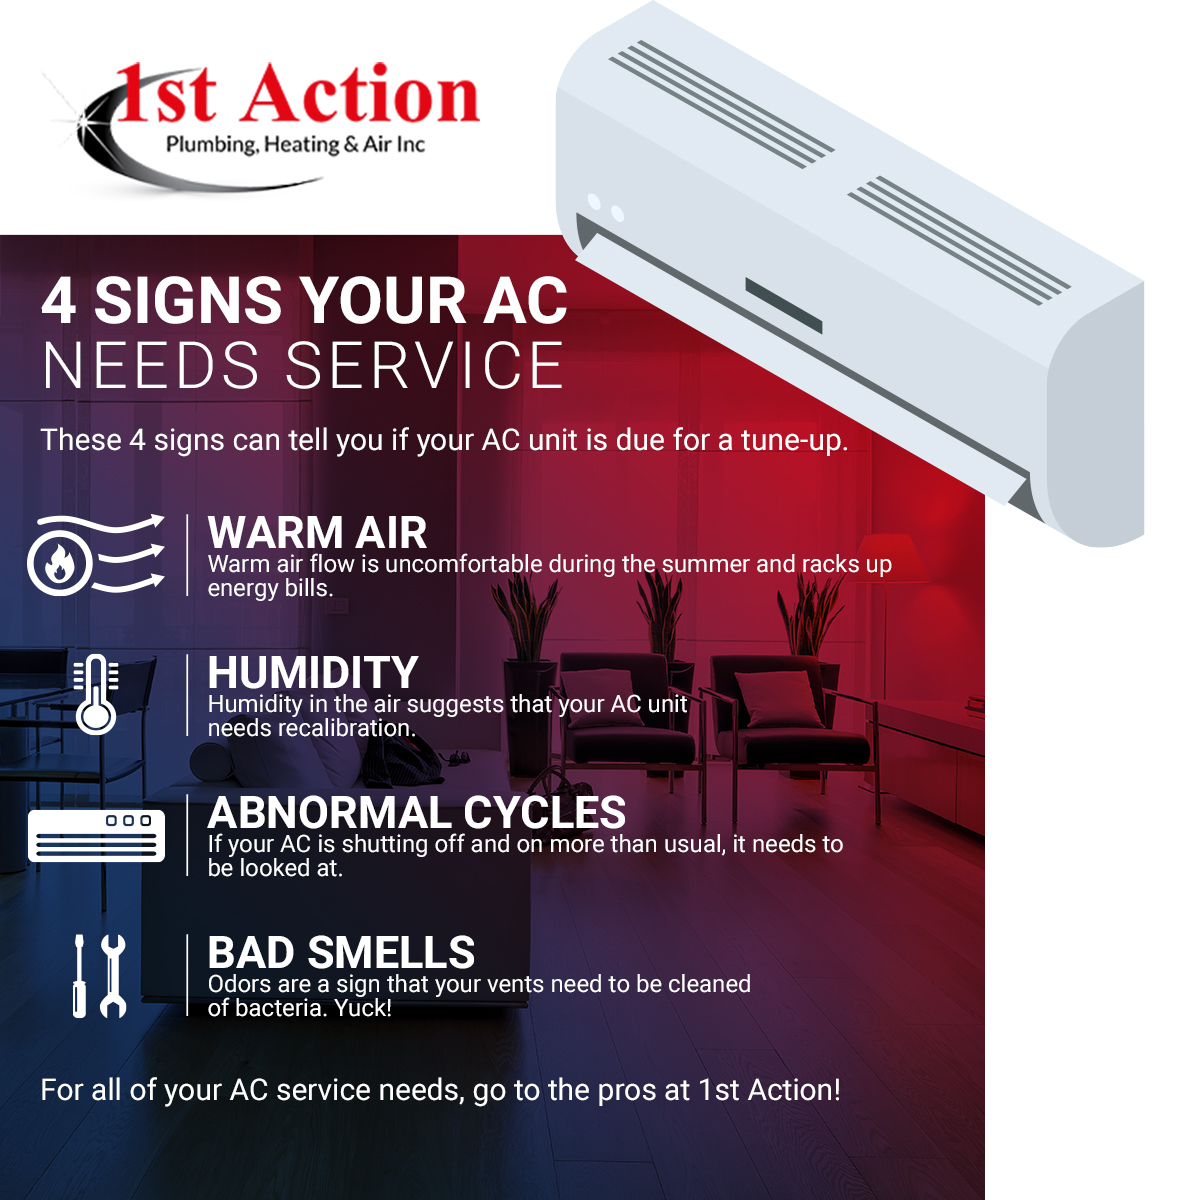 4 Signs your AC needs service infographic